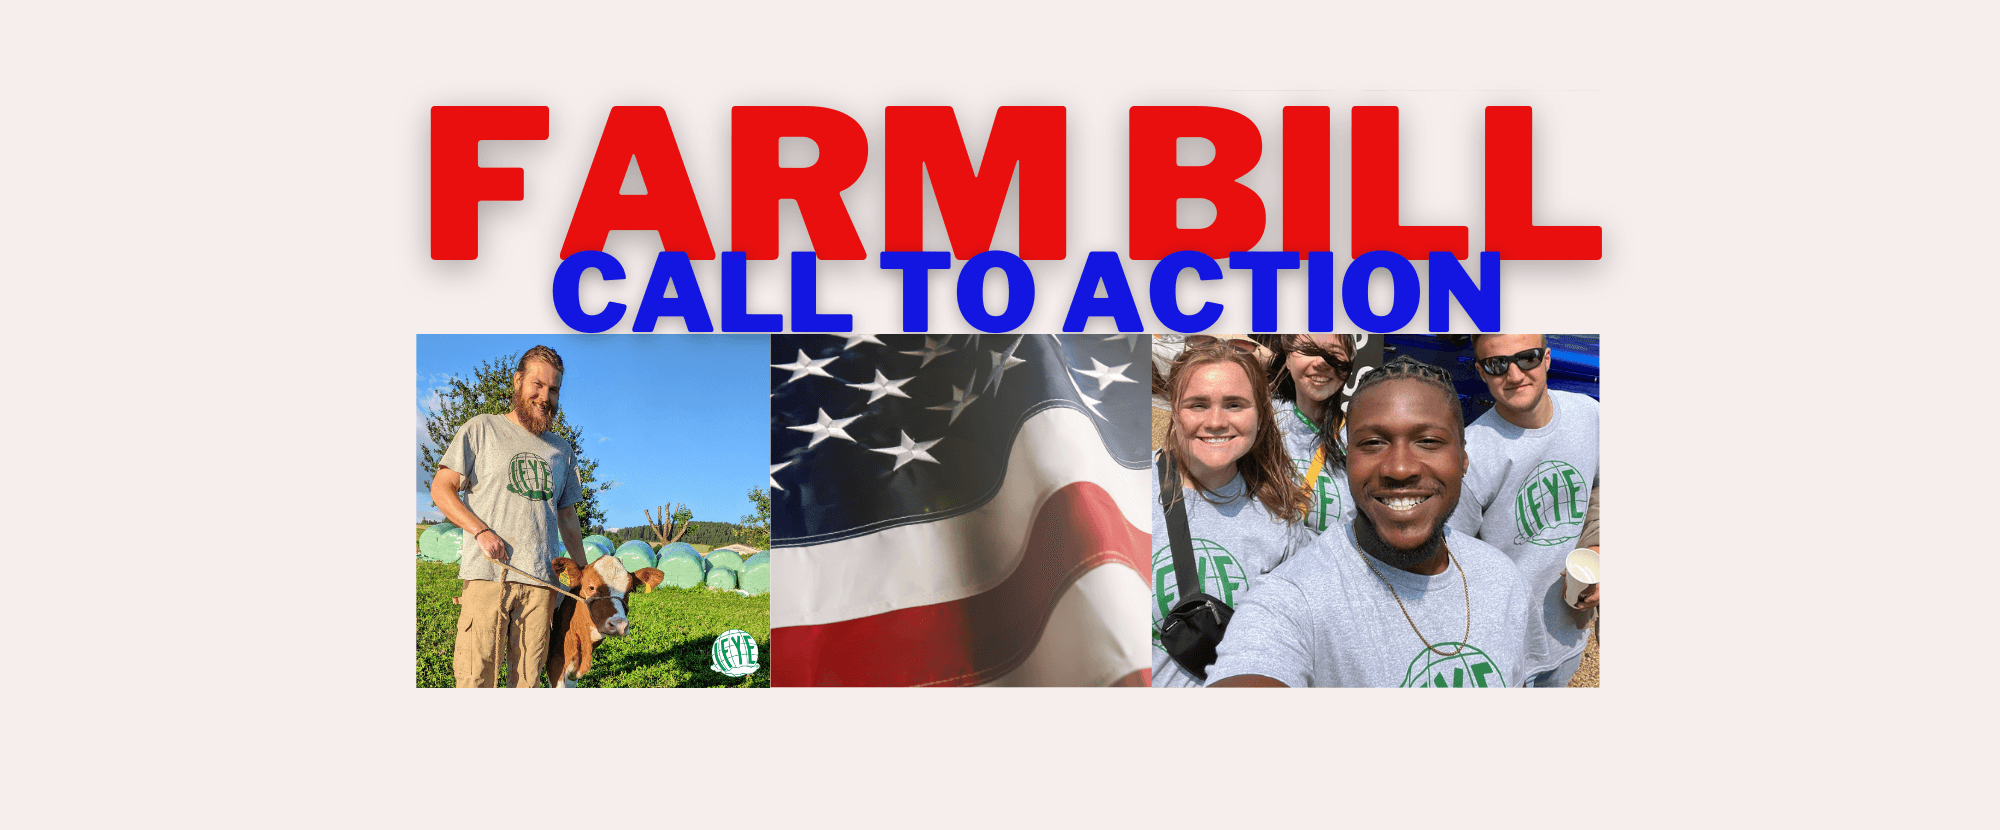 Farm Bill - Call to Action